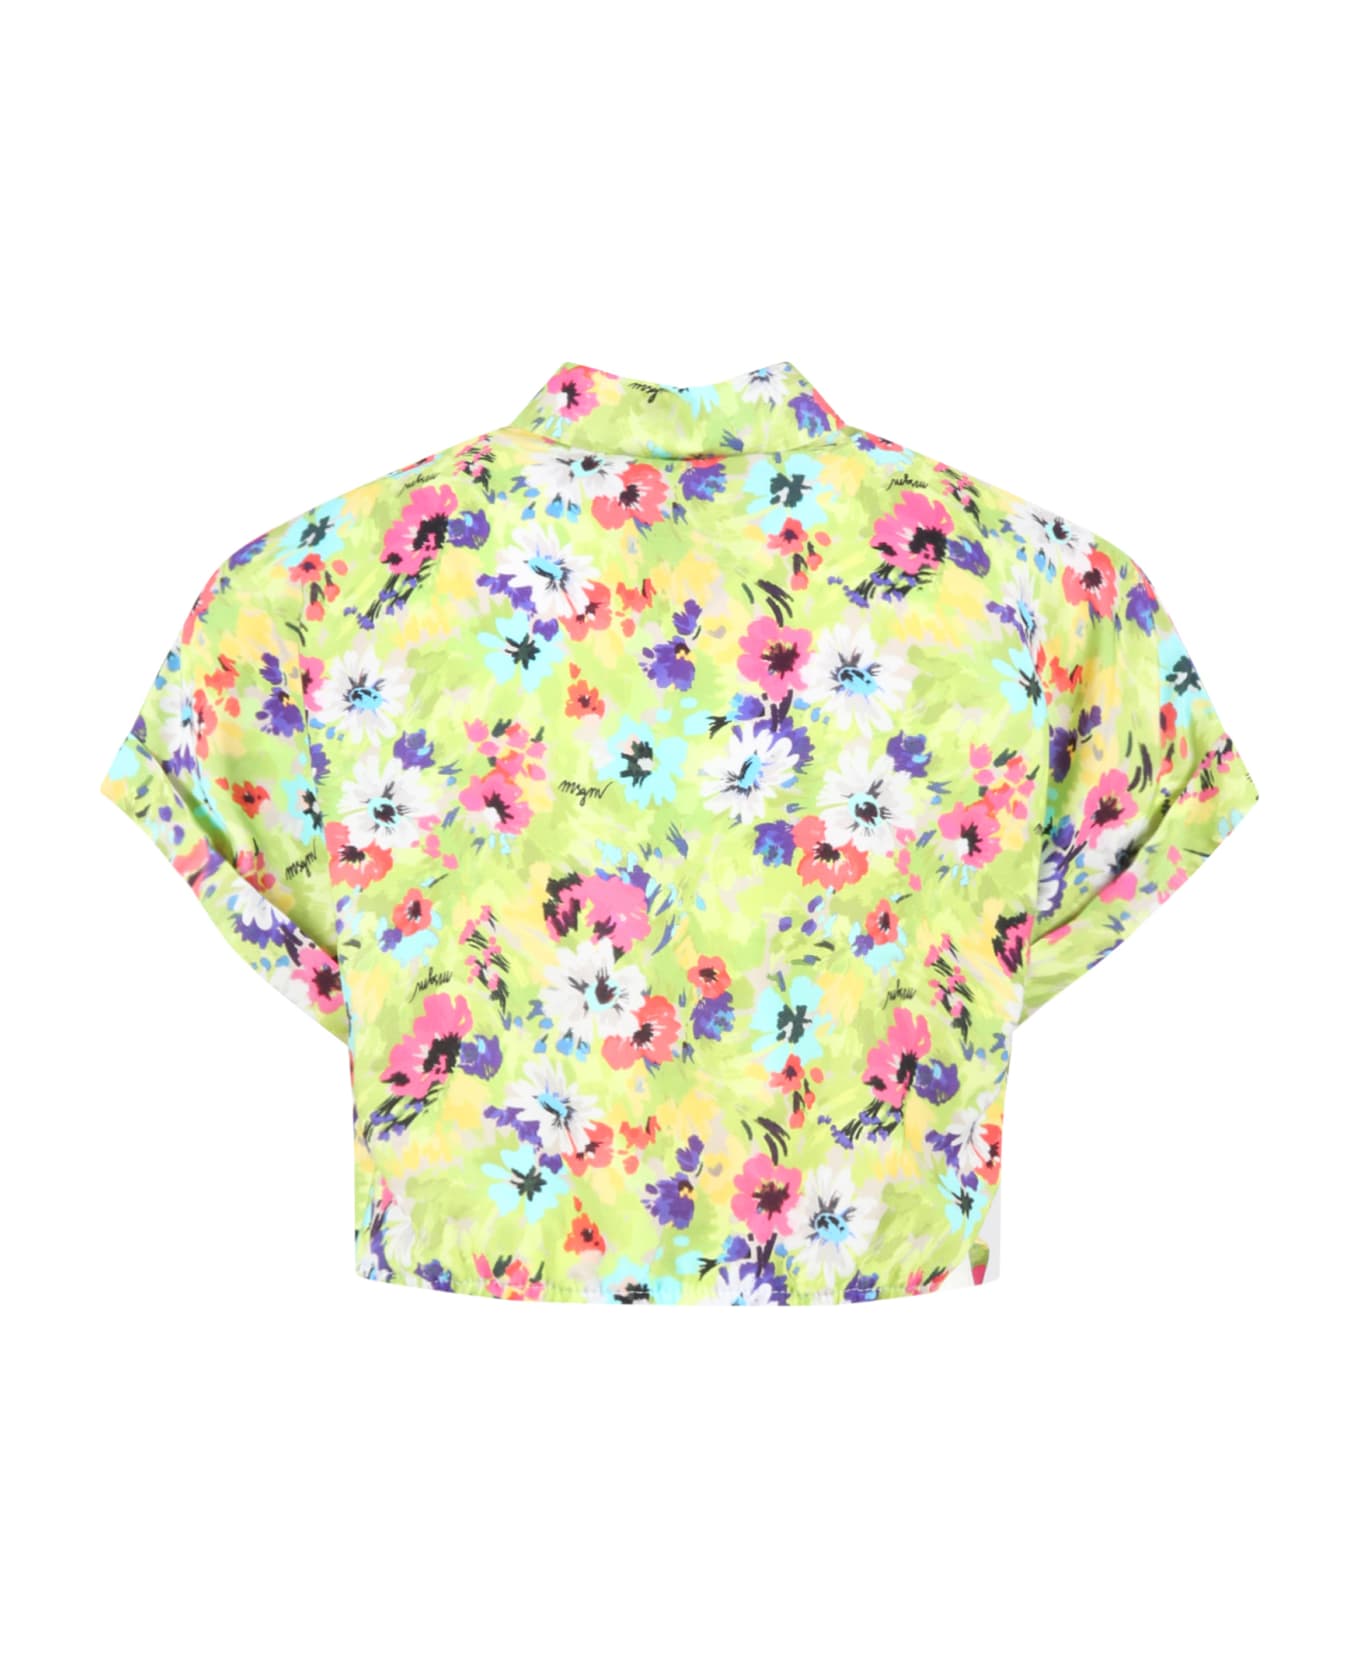 MSGM Green Shirt For Girl With Floral Print - Green シャツ